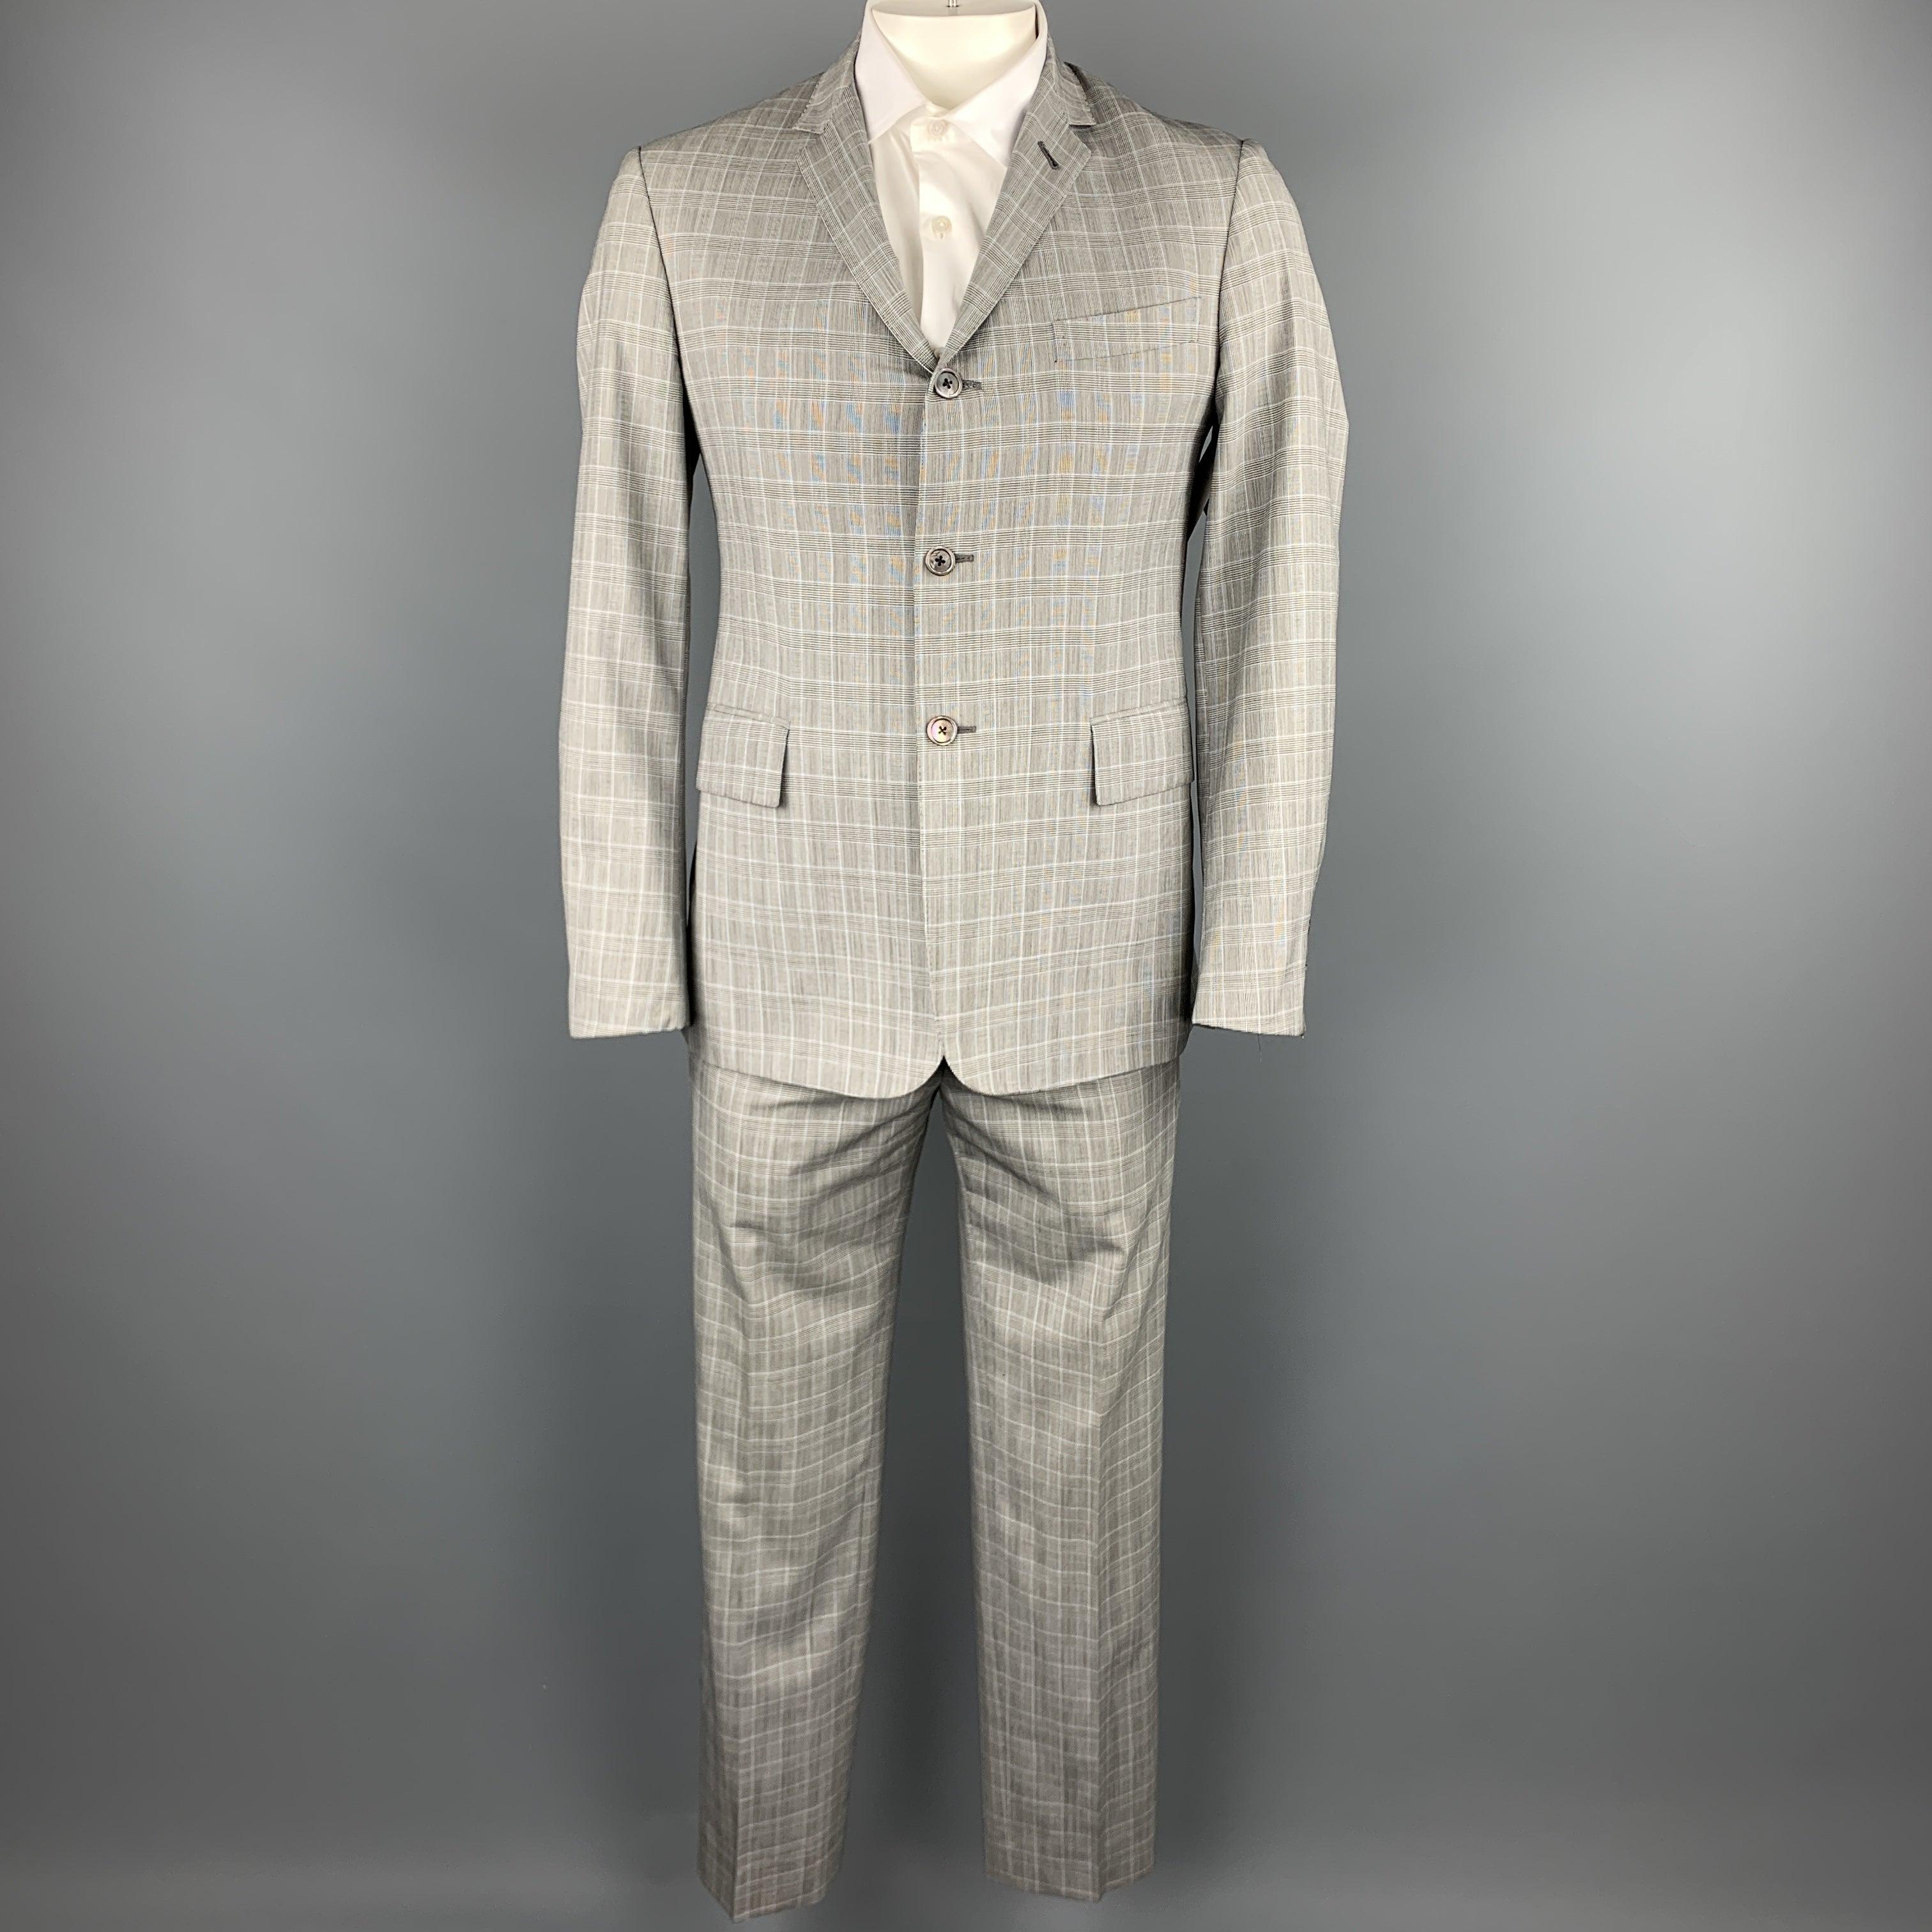 BLACK FLEECE
suit comes in a gray glenplaid wool and includes a single breasted, three button sport coat with a notch lapel and matching flat front trousers. Made in Italy.
Excellent Pre-Owned Condition. 

Marked:   BB 2 

Measurements: 
 